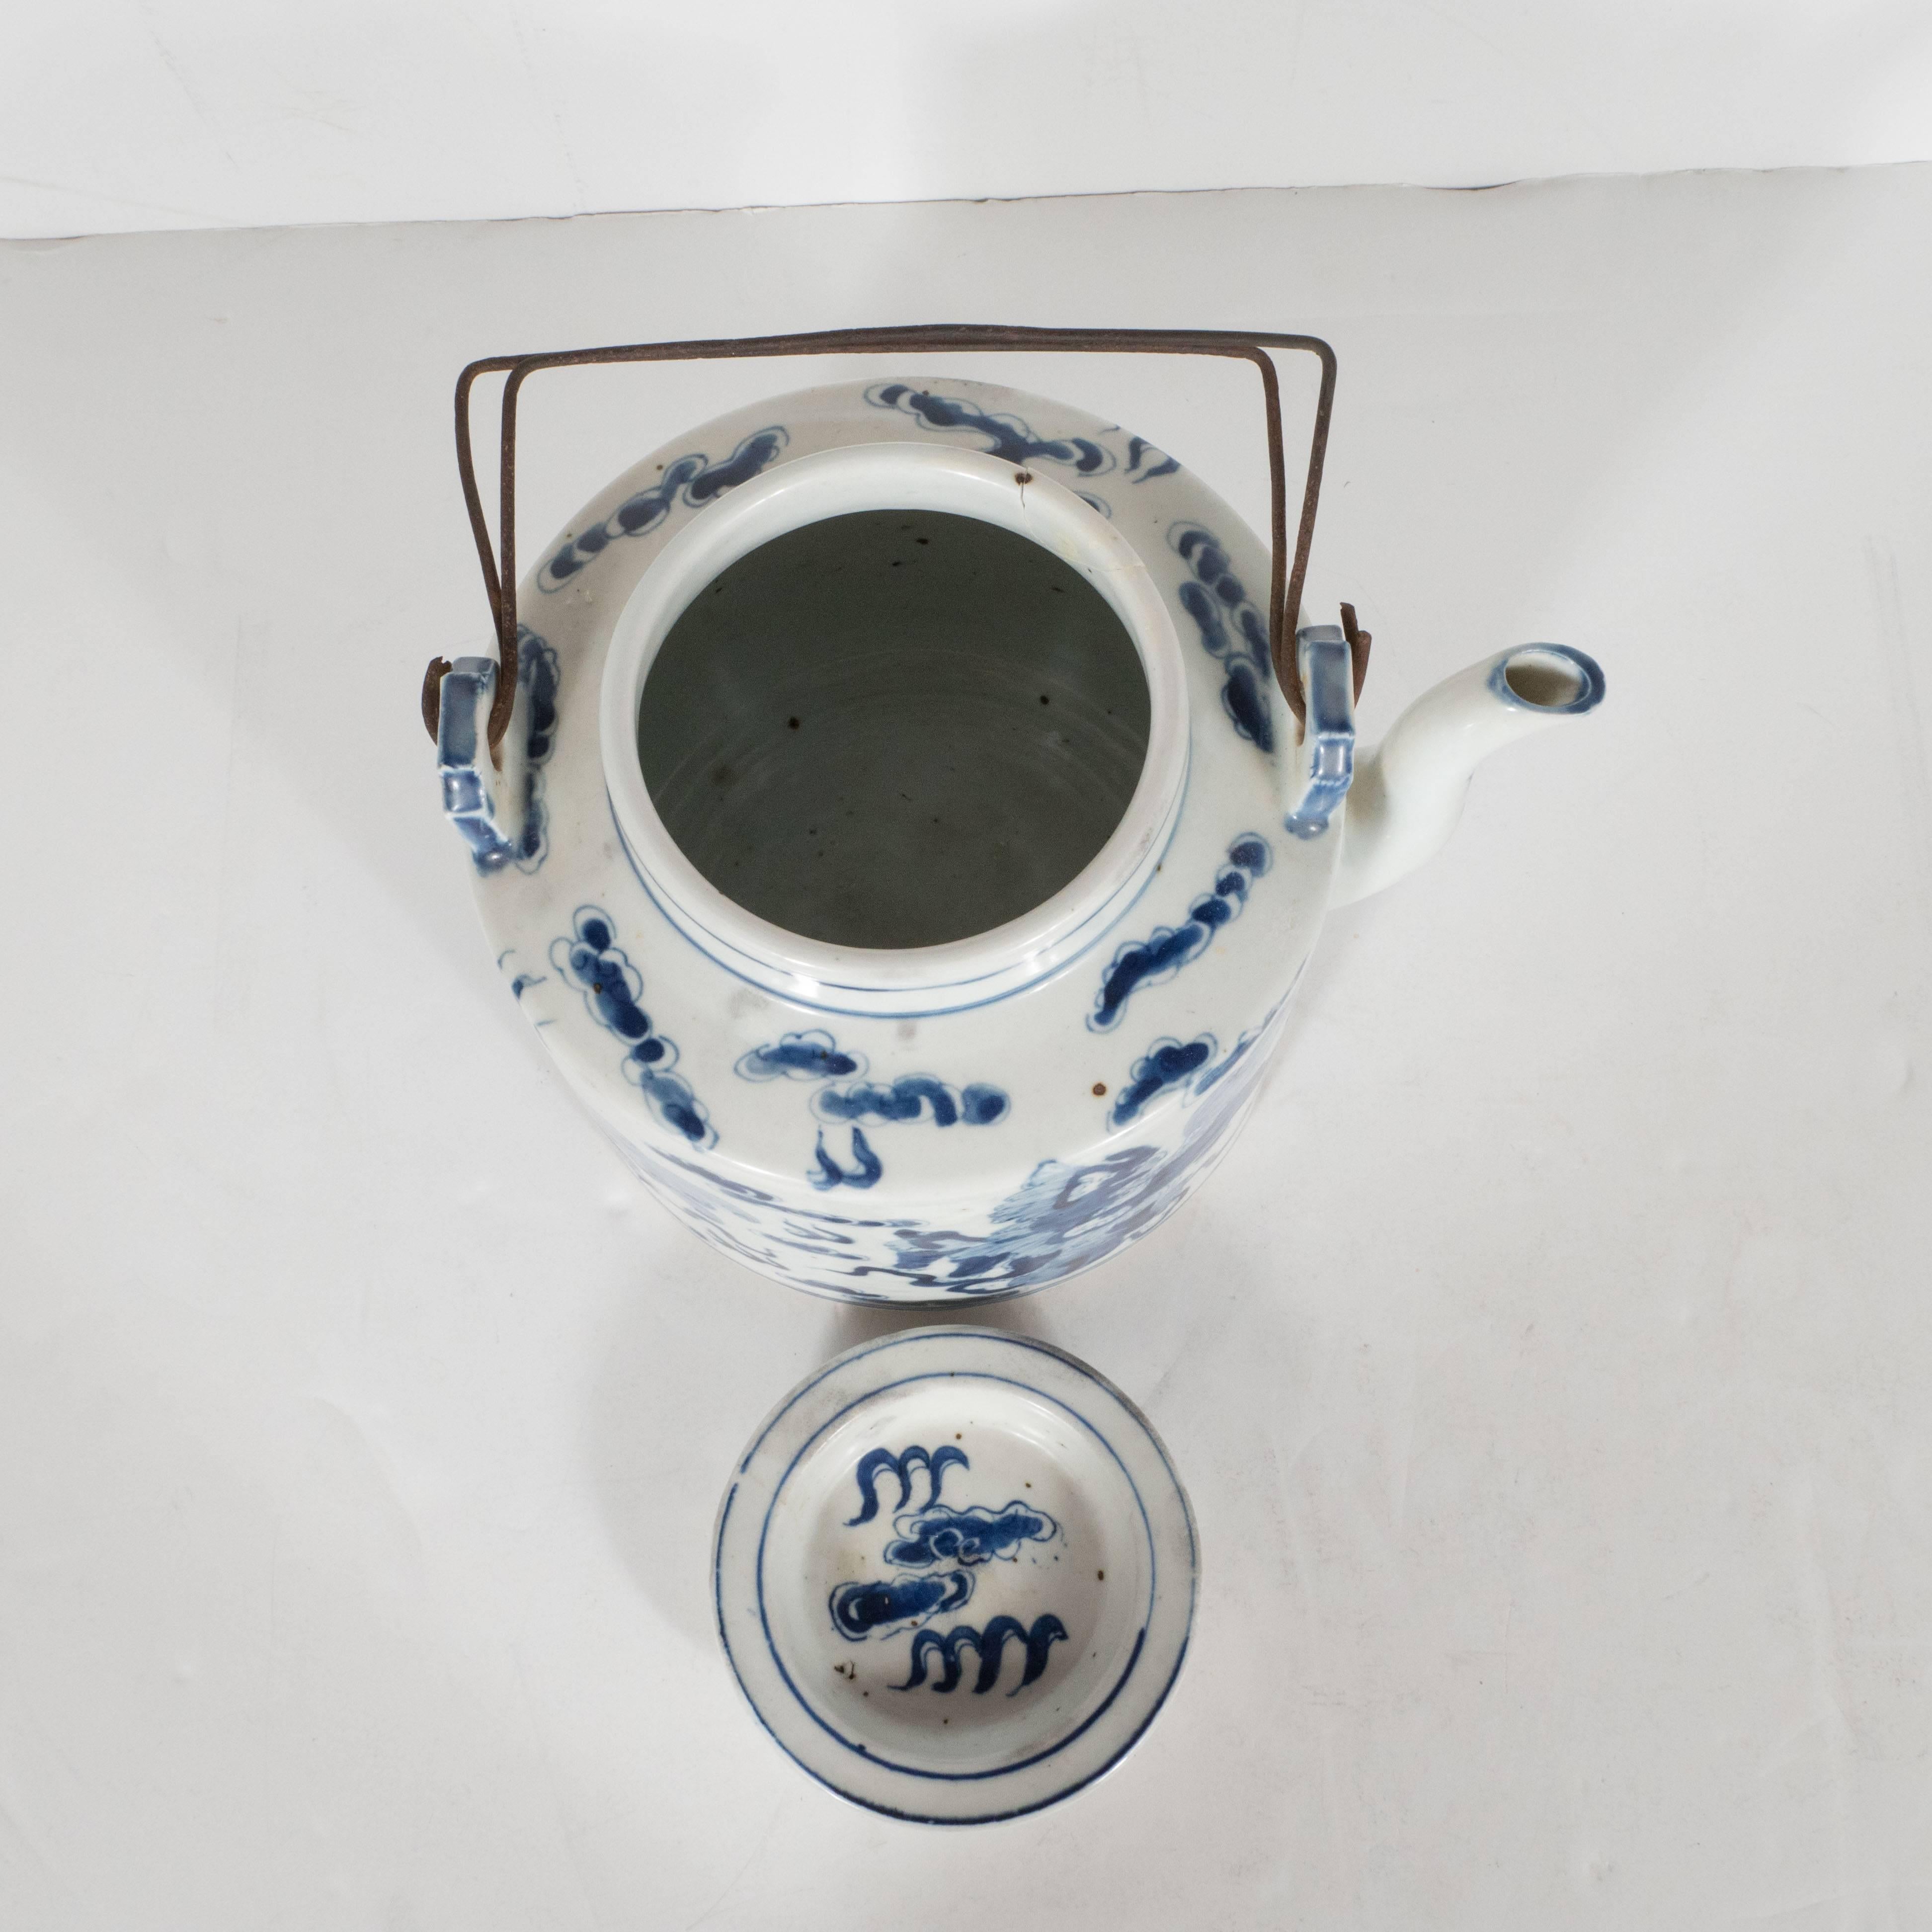 Exquisite Chinese Delft Tea Pot 19th Century with Temple Guardian Lions Motif 4